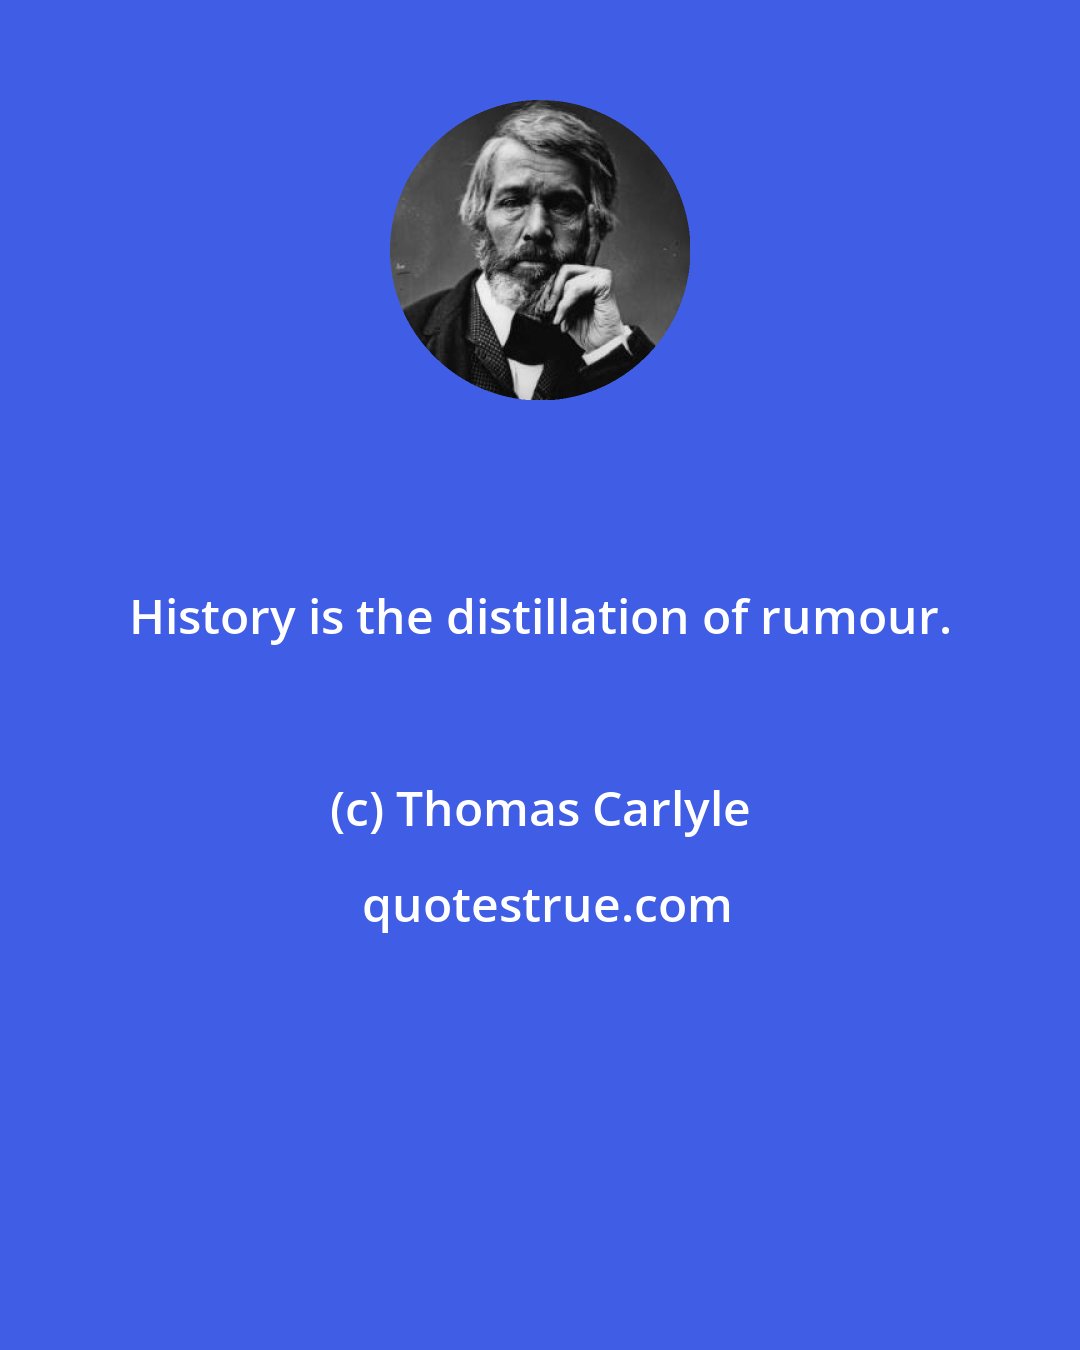 Thomas Carlyle: History is the distillation of rumour.